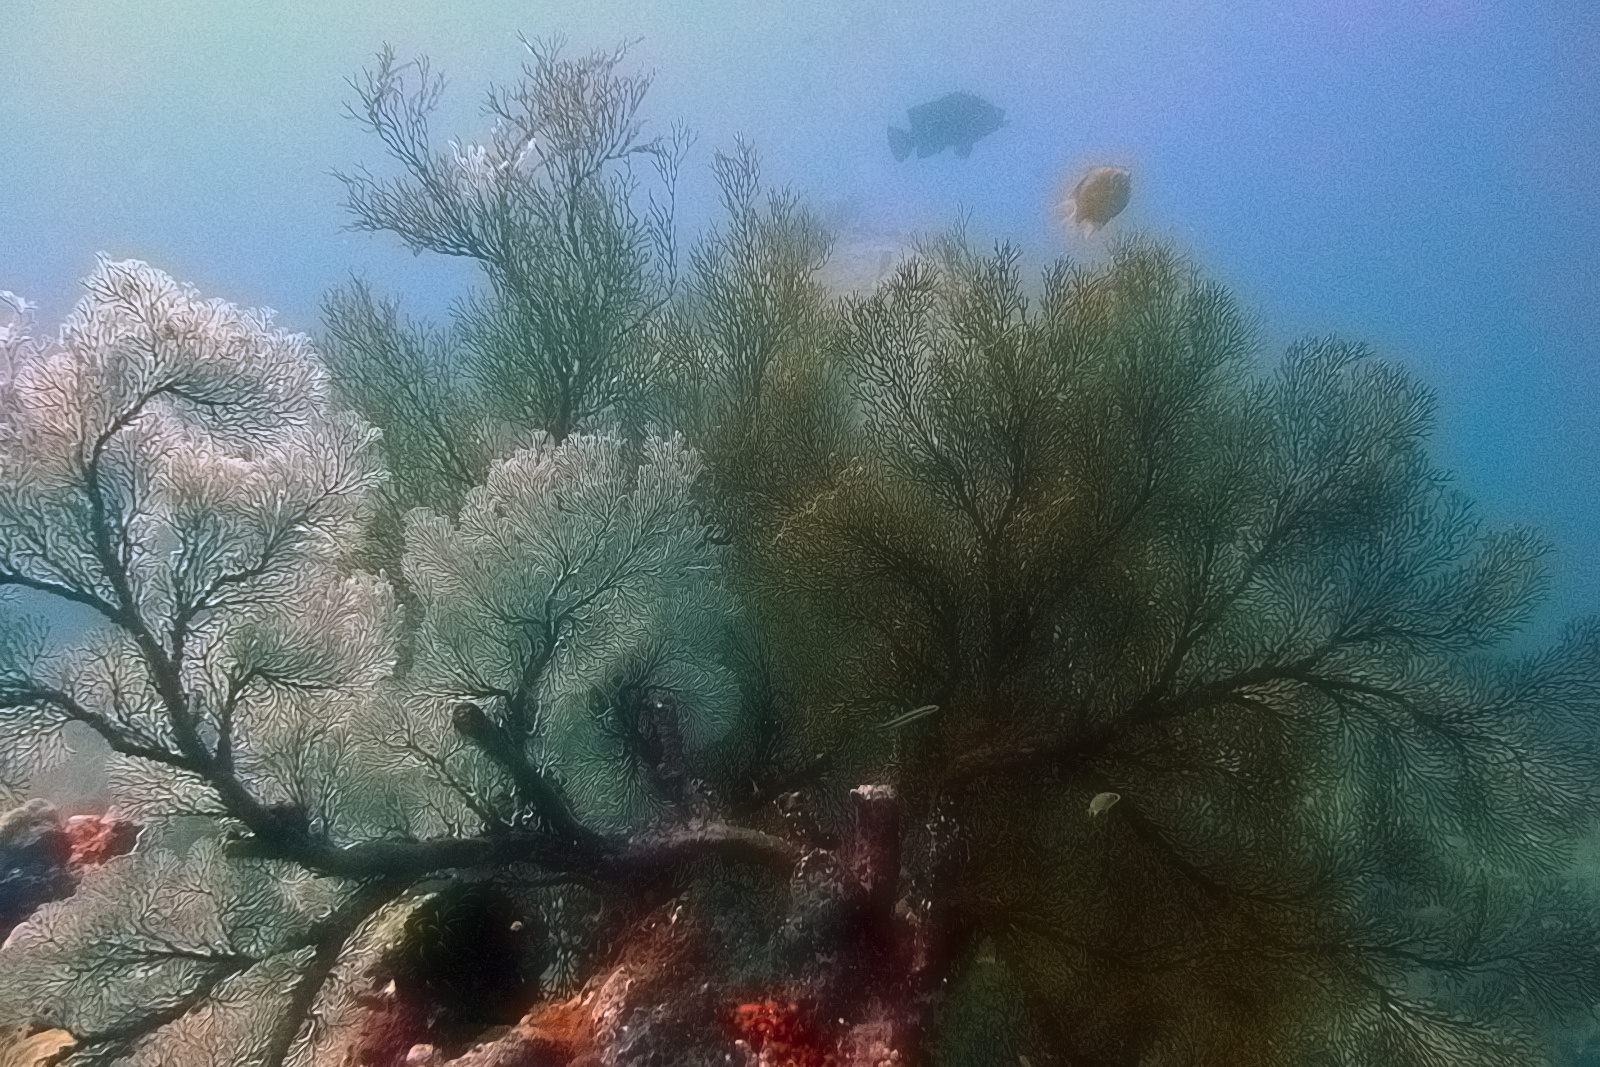 Sea fans under the water